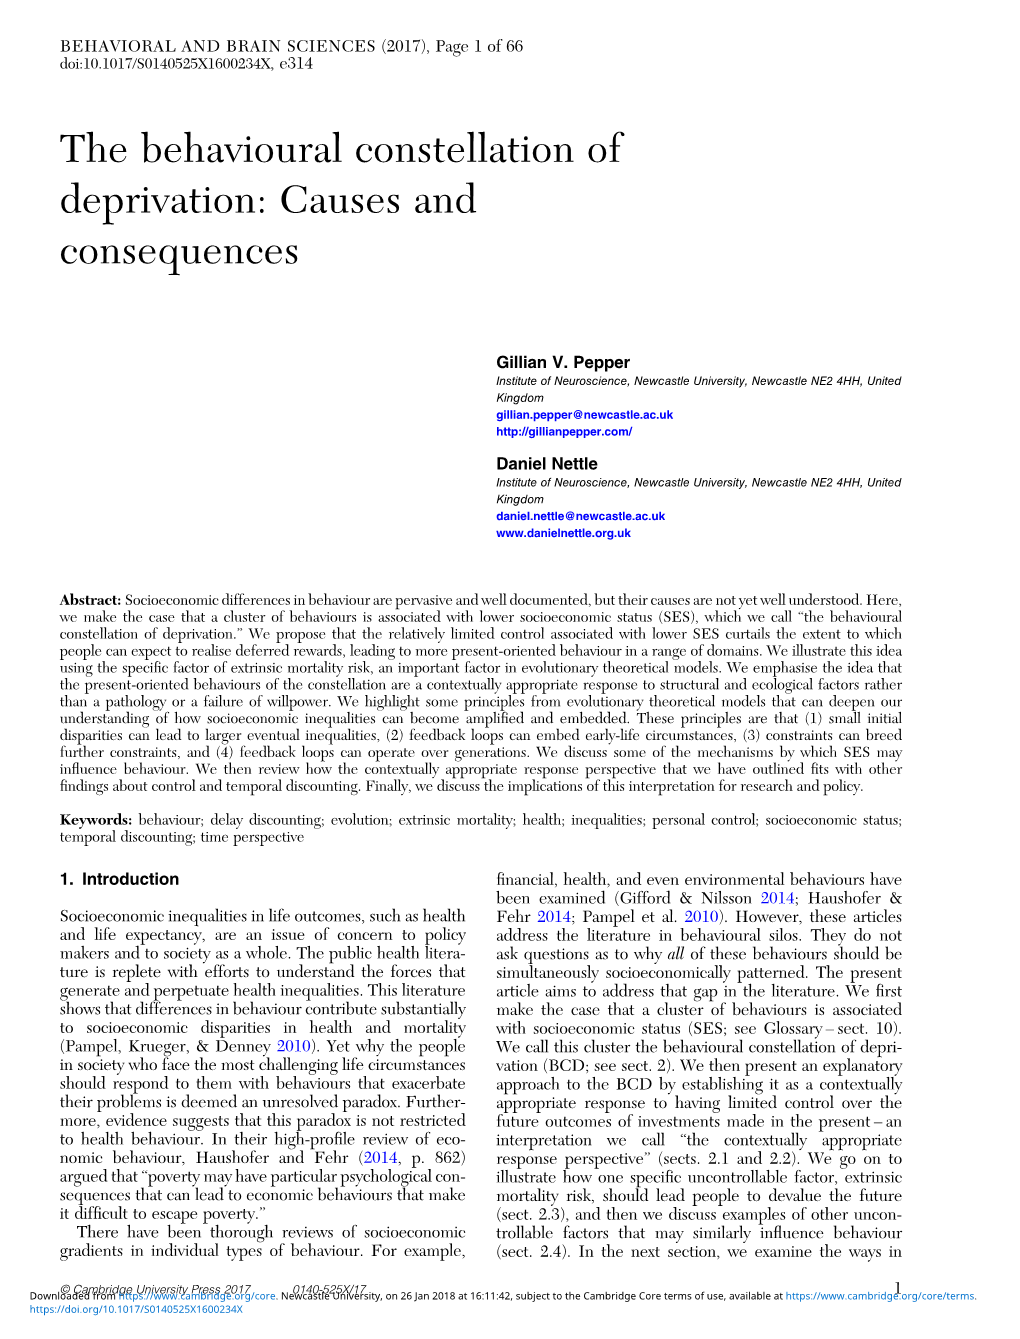 The Behavioural Constellation of Deprivation: Causes and Consequences